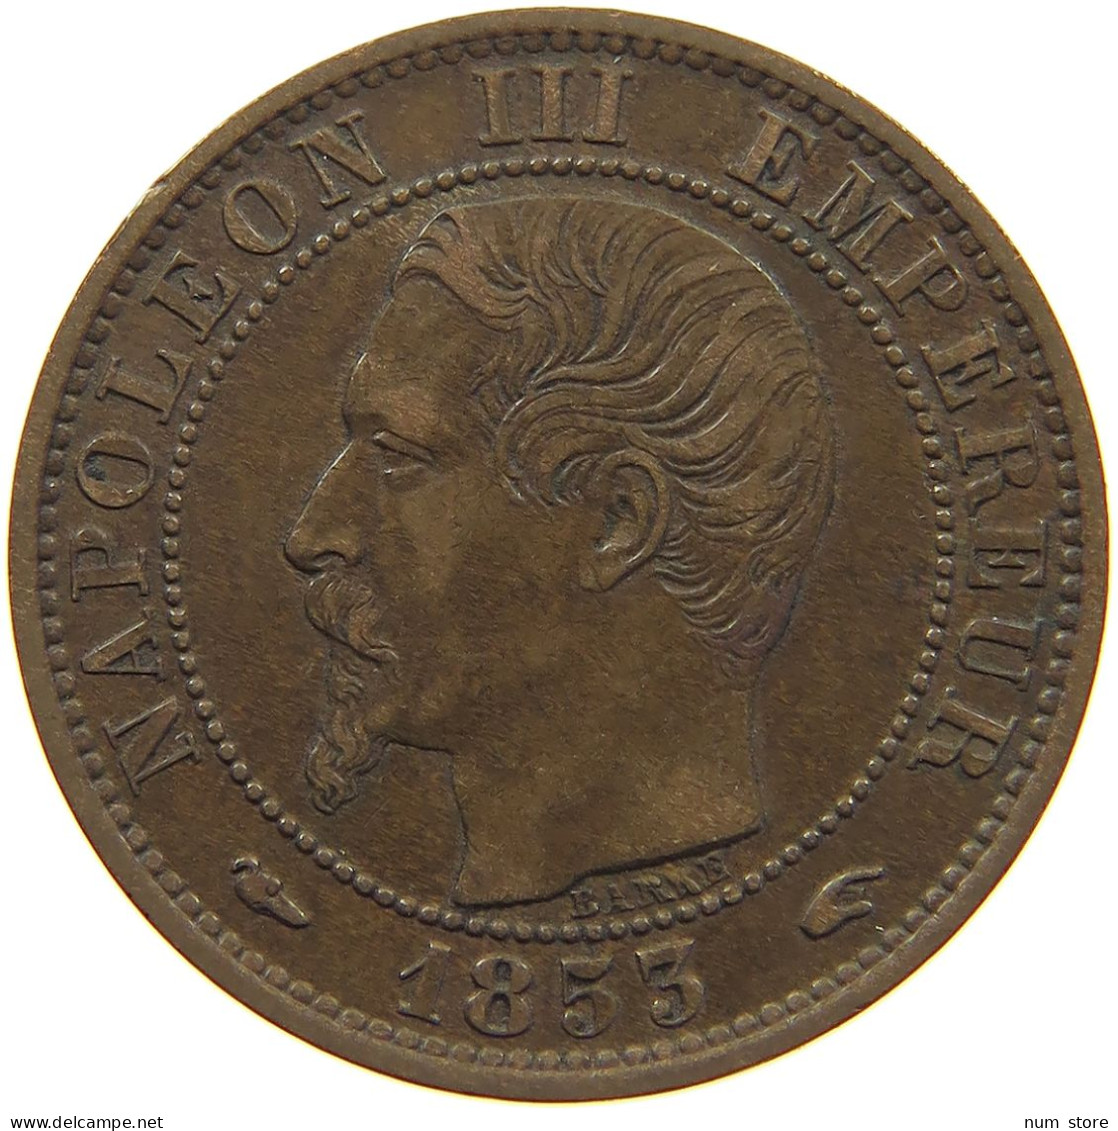 FRANCE 5 CENTIMES 1853 A Napoleon III. (1852-1870) #c018 0187 - 5 Centimes